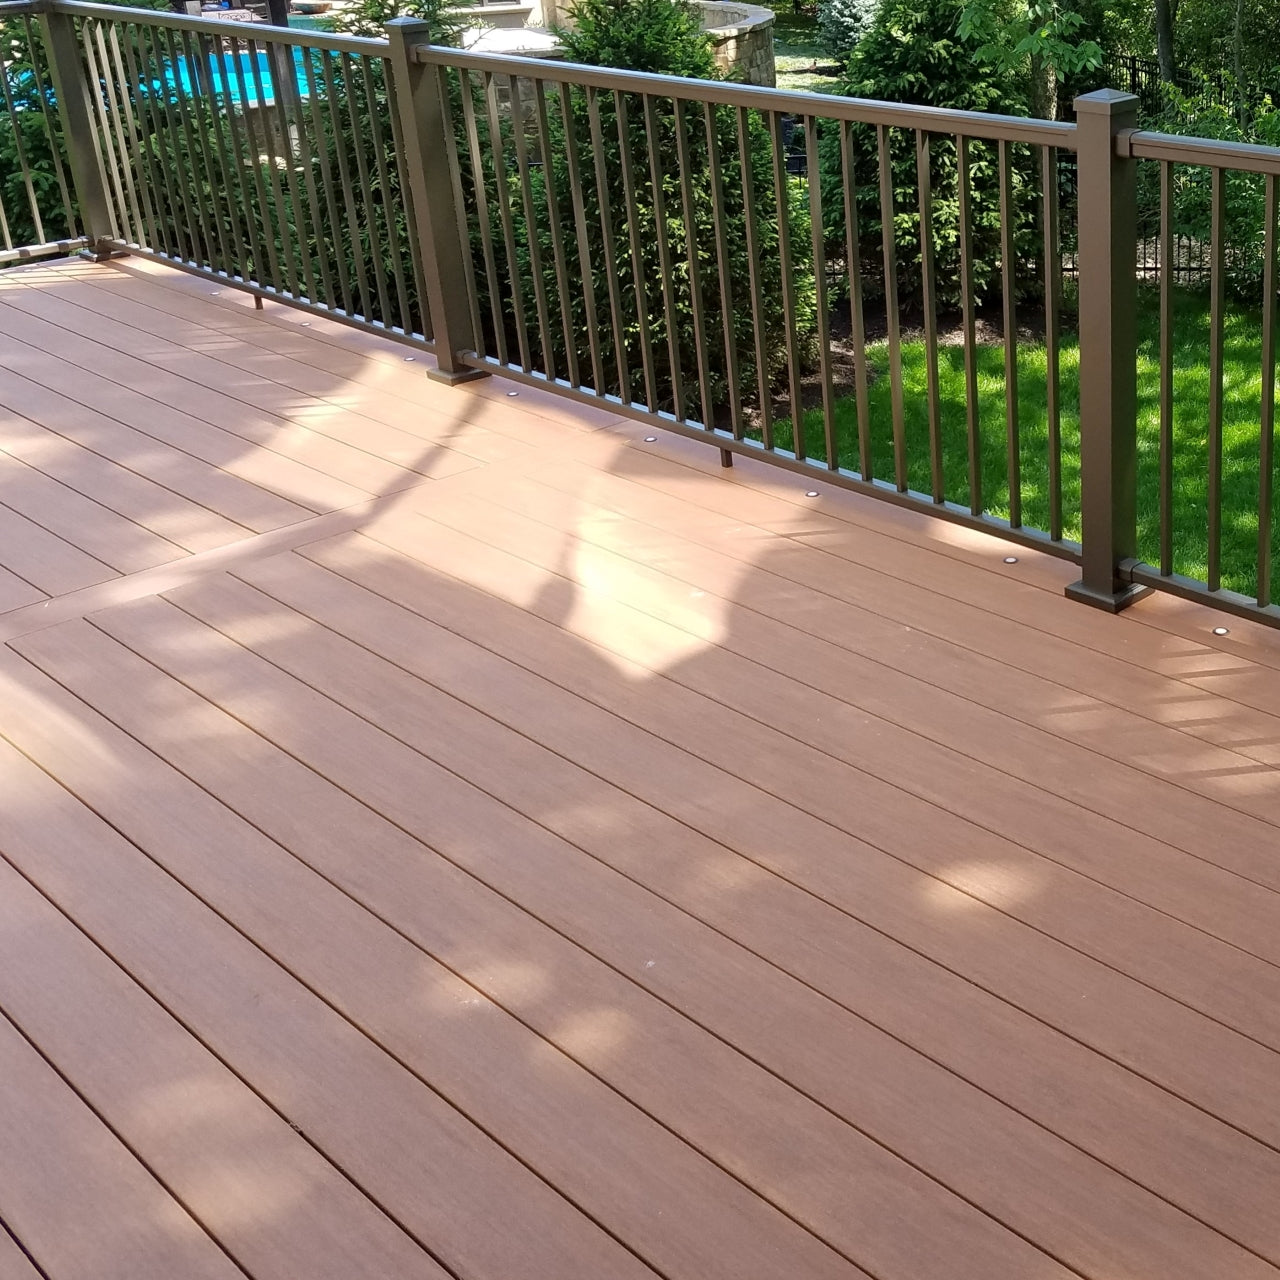 Azek Cypress PVC Decking Profile from vintage by azek fully encapsulated plastic decking